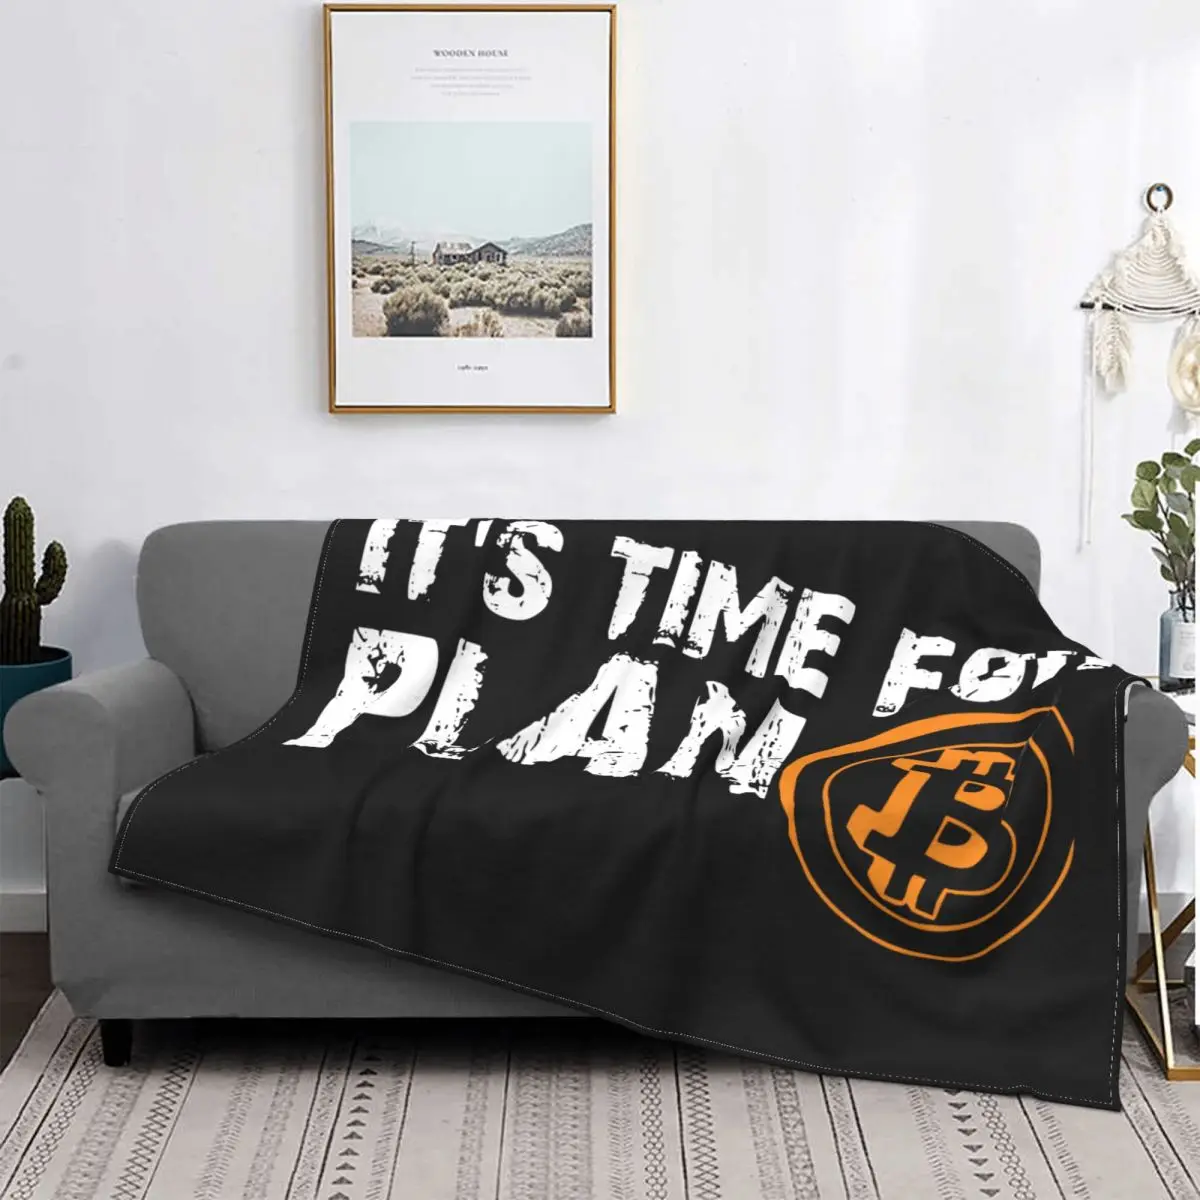 

It's Time For Plan B Bitcoin BTC Crypto Currency Blanket Cryptocurrency Blockchain Geek Flannel Throw Blanket for Bed Office